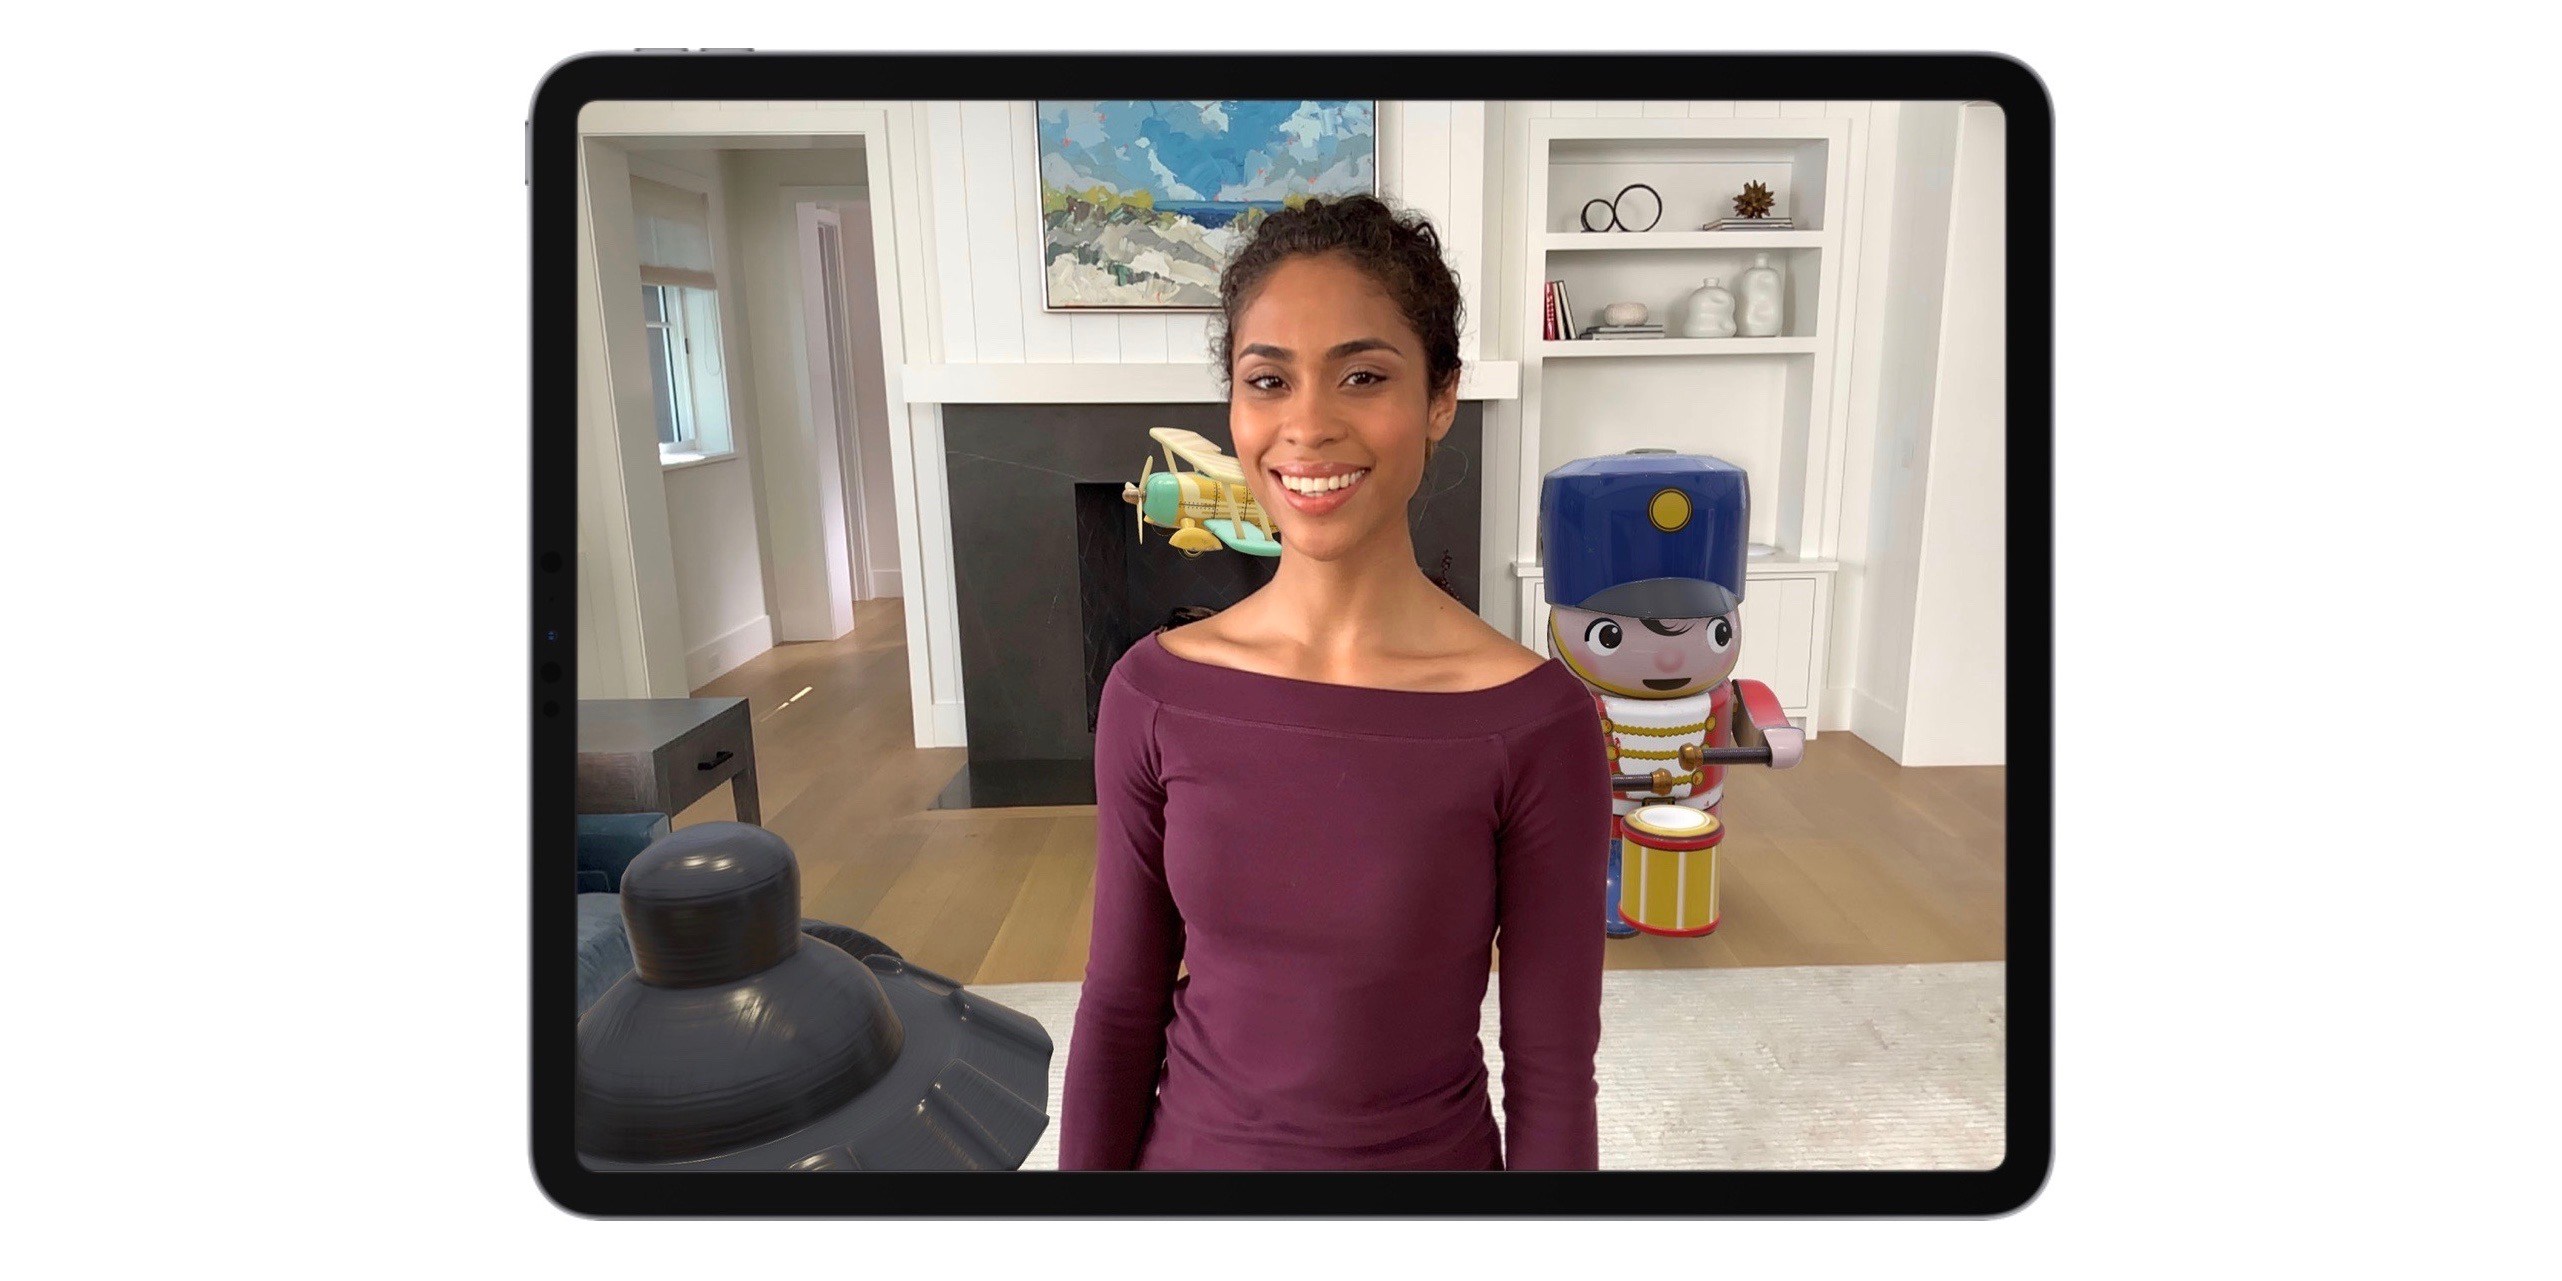 ARKit 3 for more immersive augmented reality